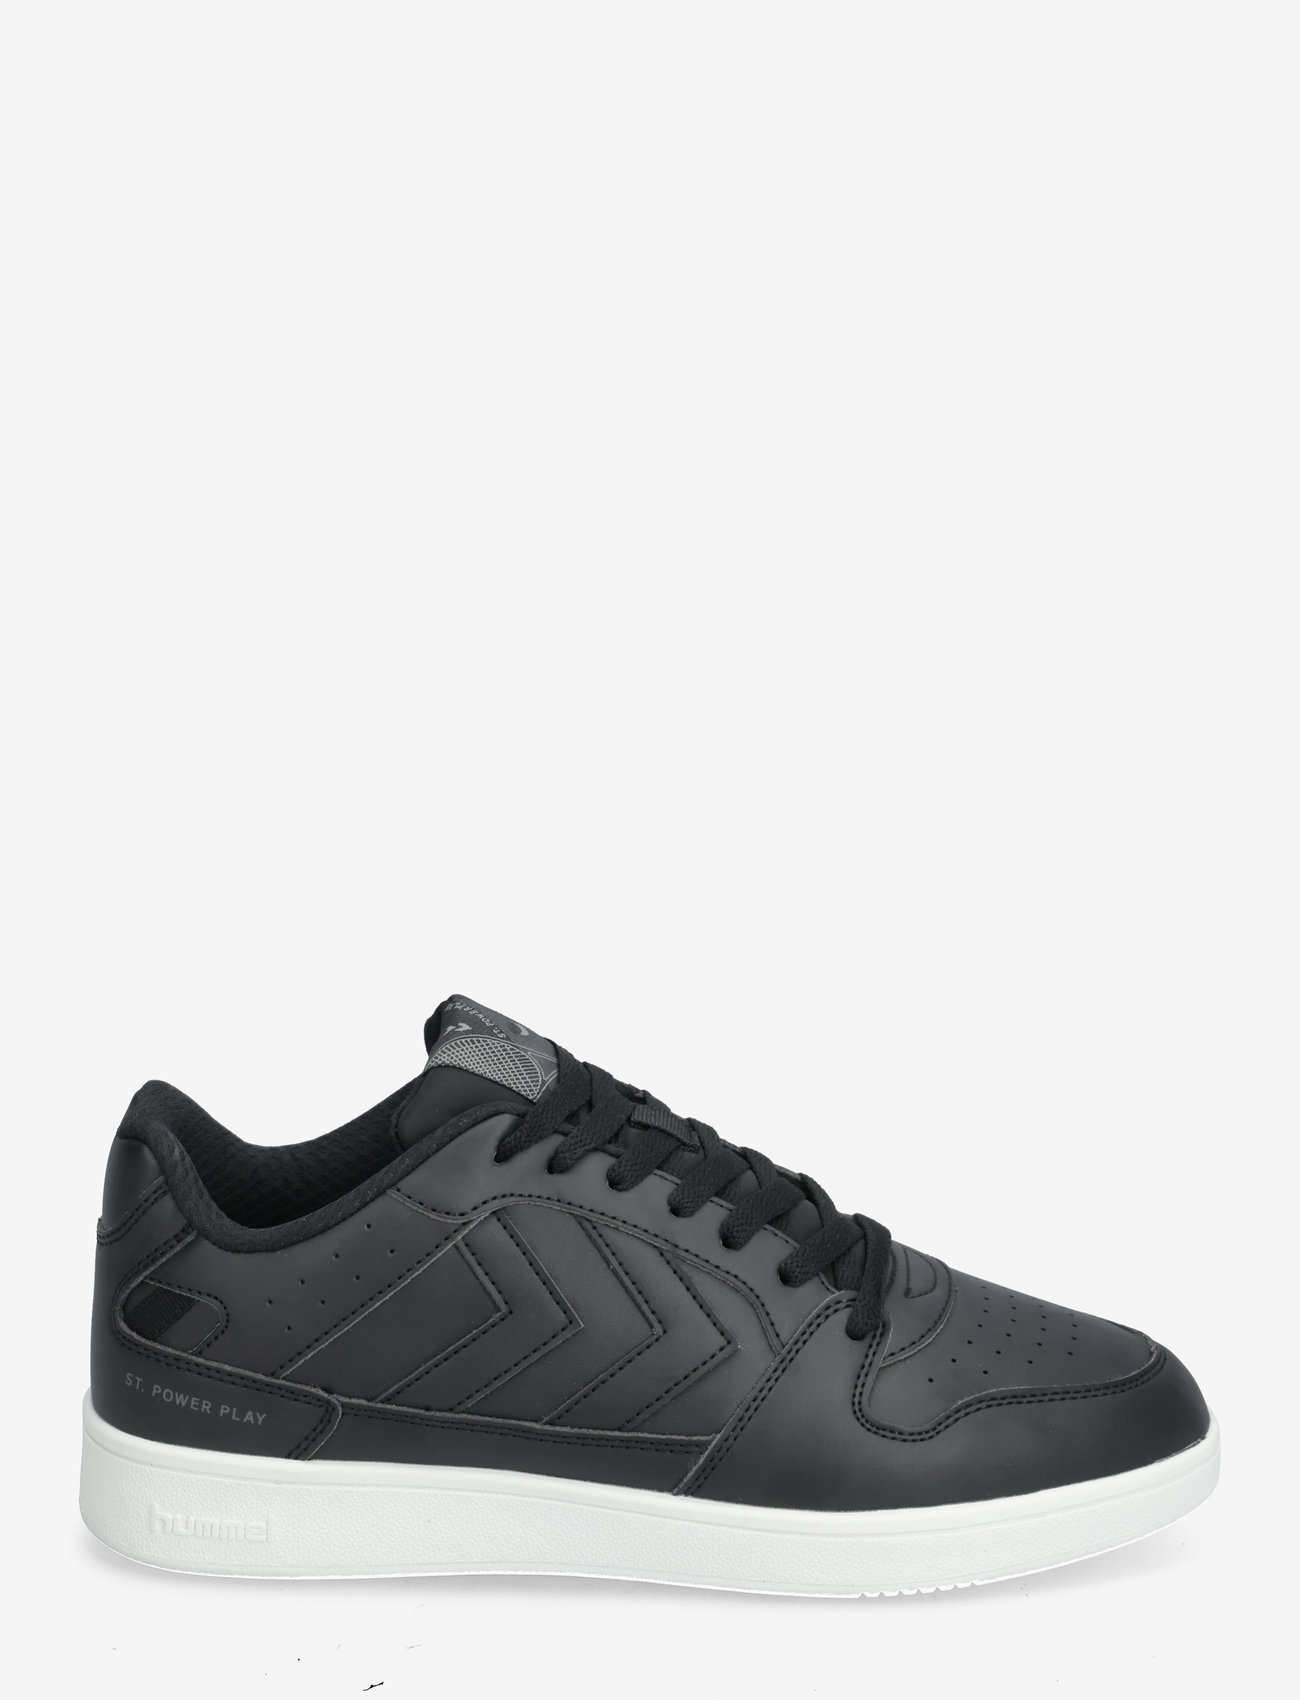 Hummel - ST. POWER PLAY - lave sneakers - black - 1